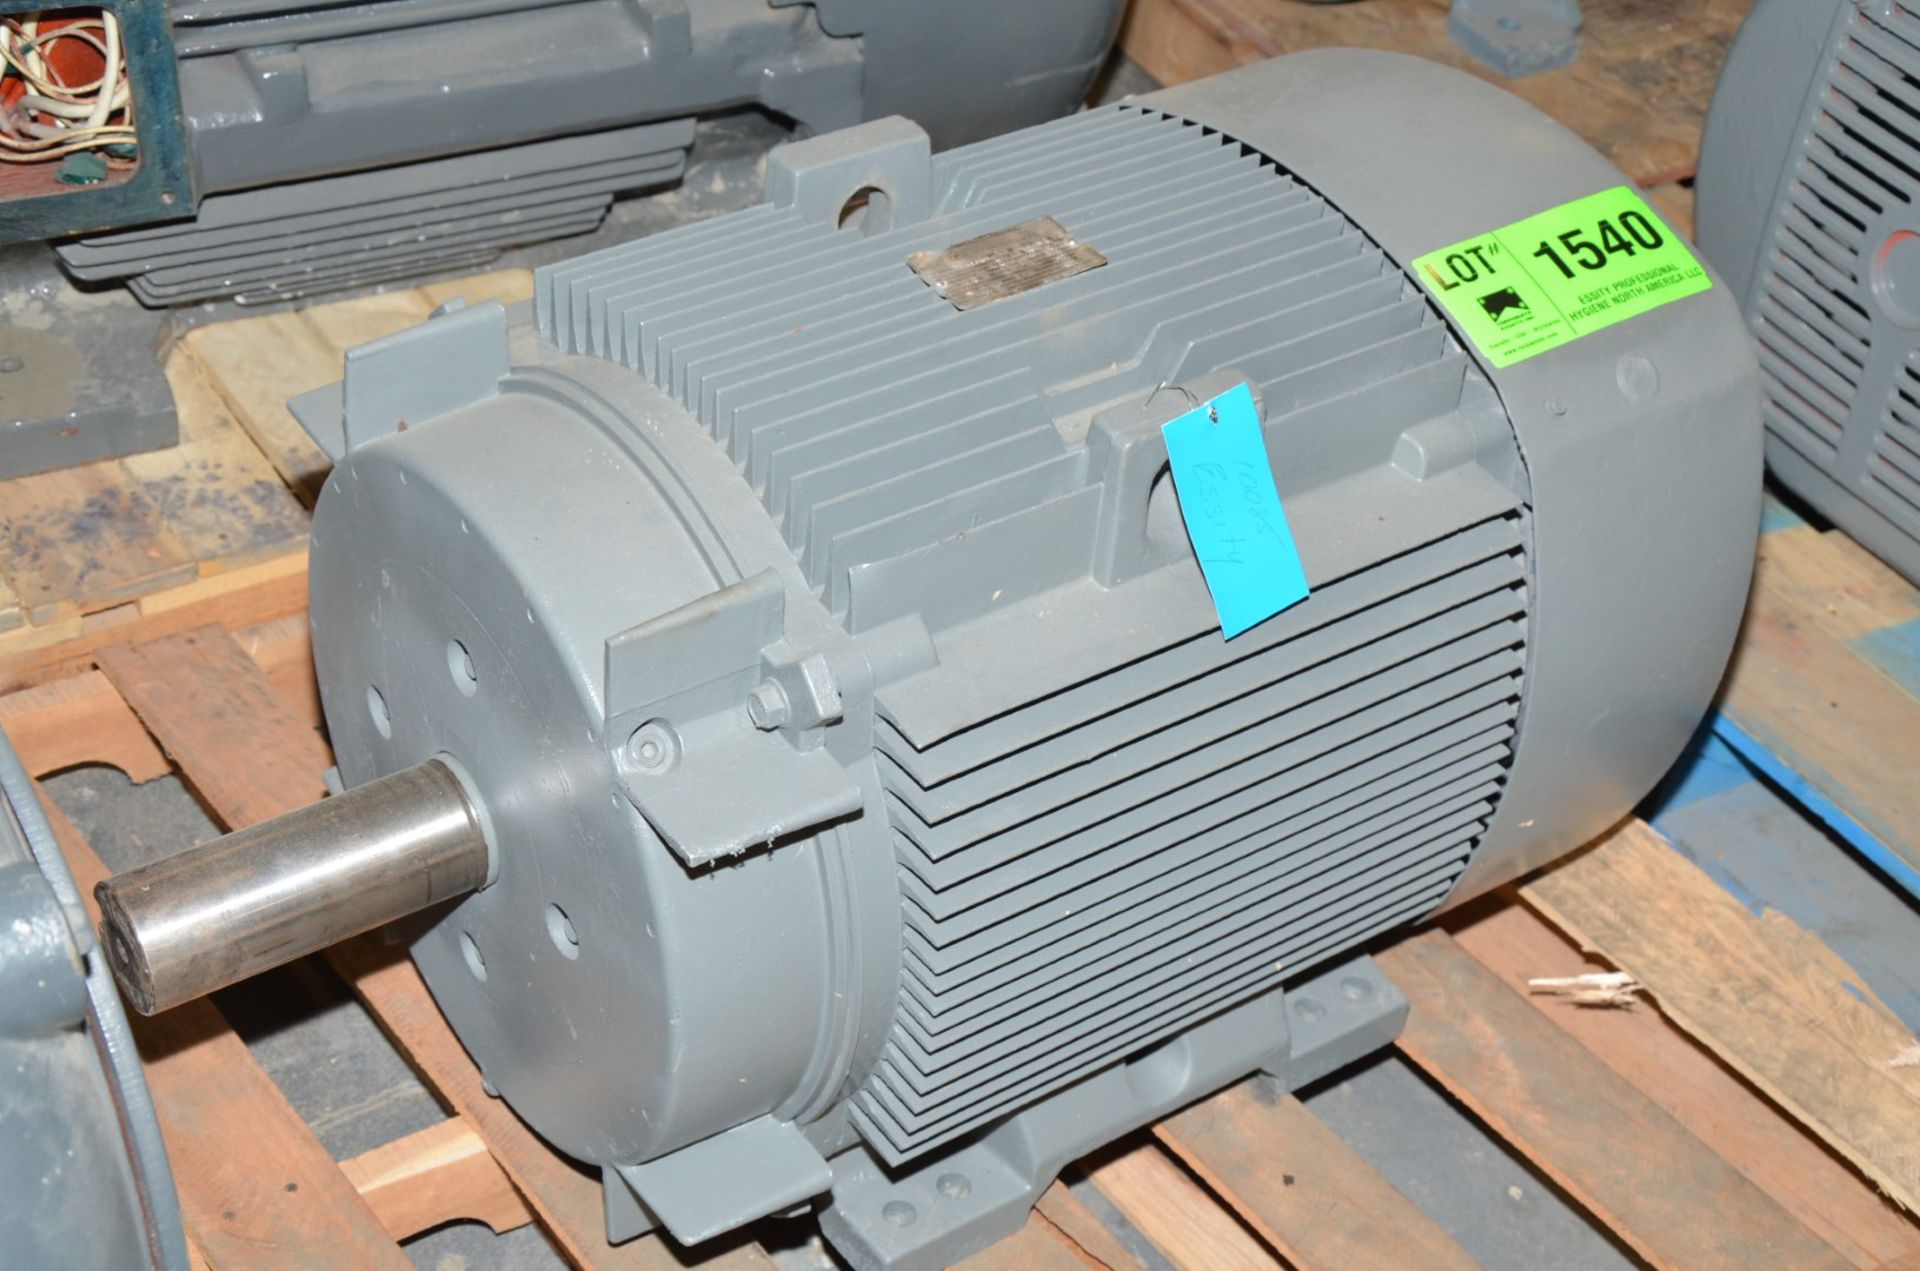 GE 75 HP 1185 RPM 460V ELECTRIC MOTOR [RIGGING FEE FOR LOT #1540 - $50 USD PLUS APPLICABLE TAXES] - Image 2 of 3